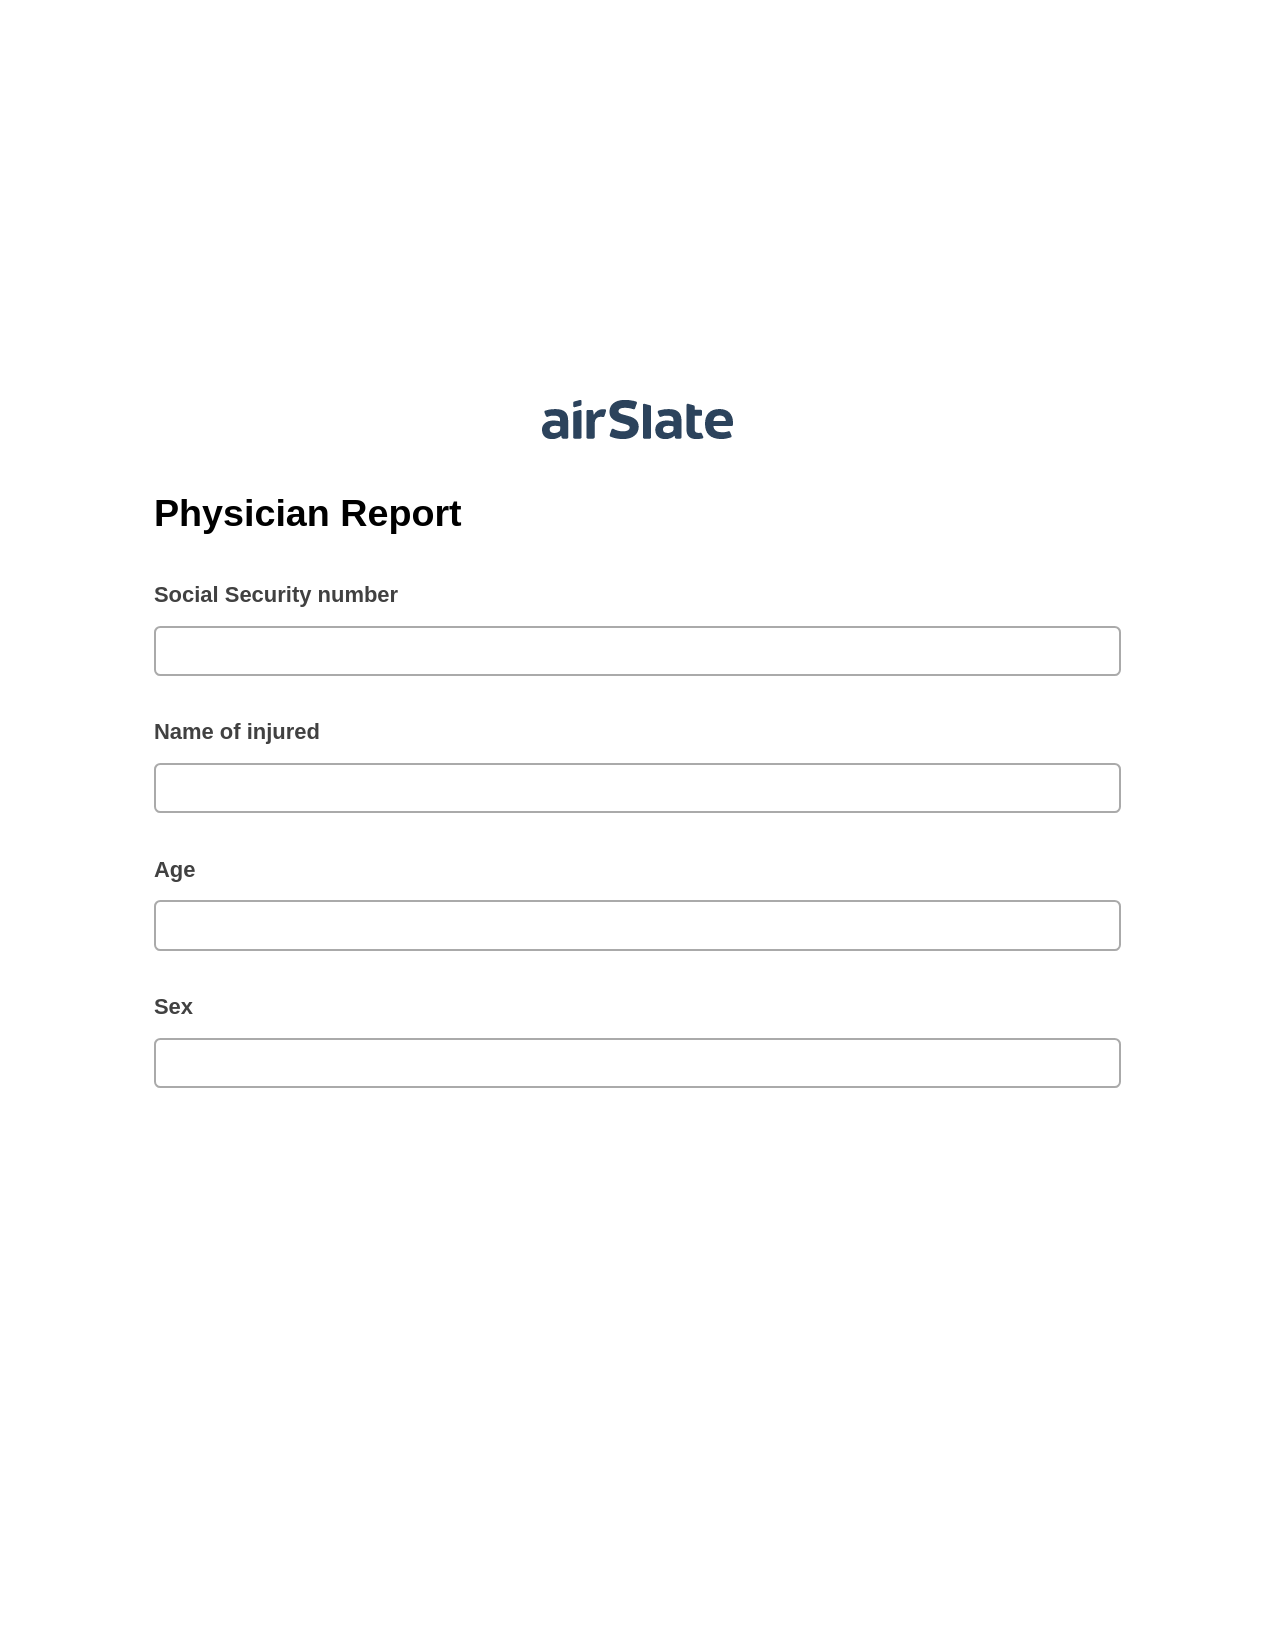 Multirole Physician Report Pre-fill Document Bot, Update NetSuite Record Bot, Export to Google Sheet Bot